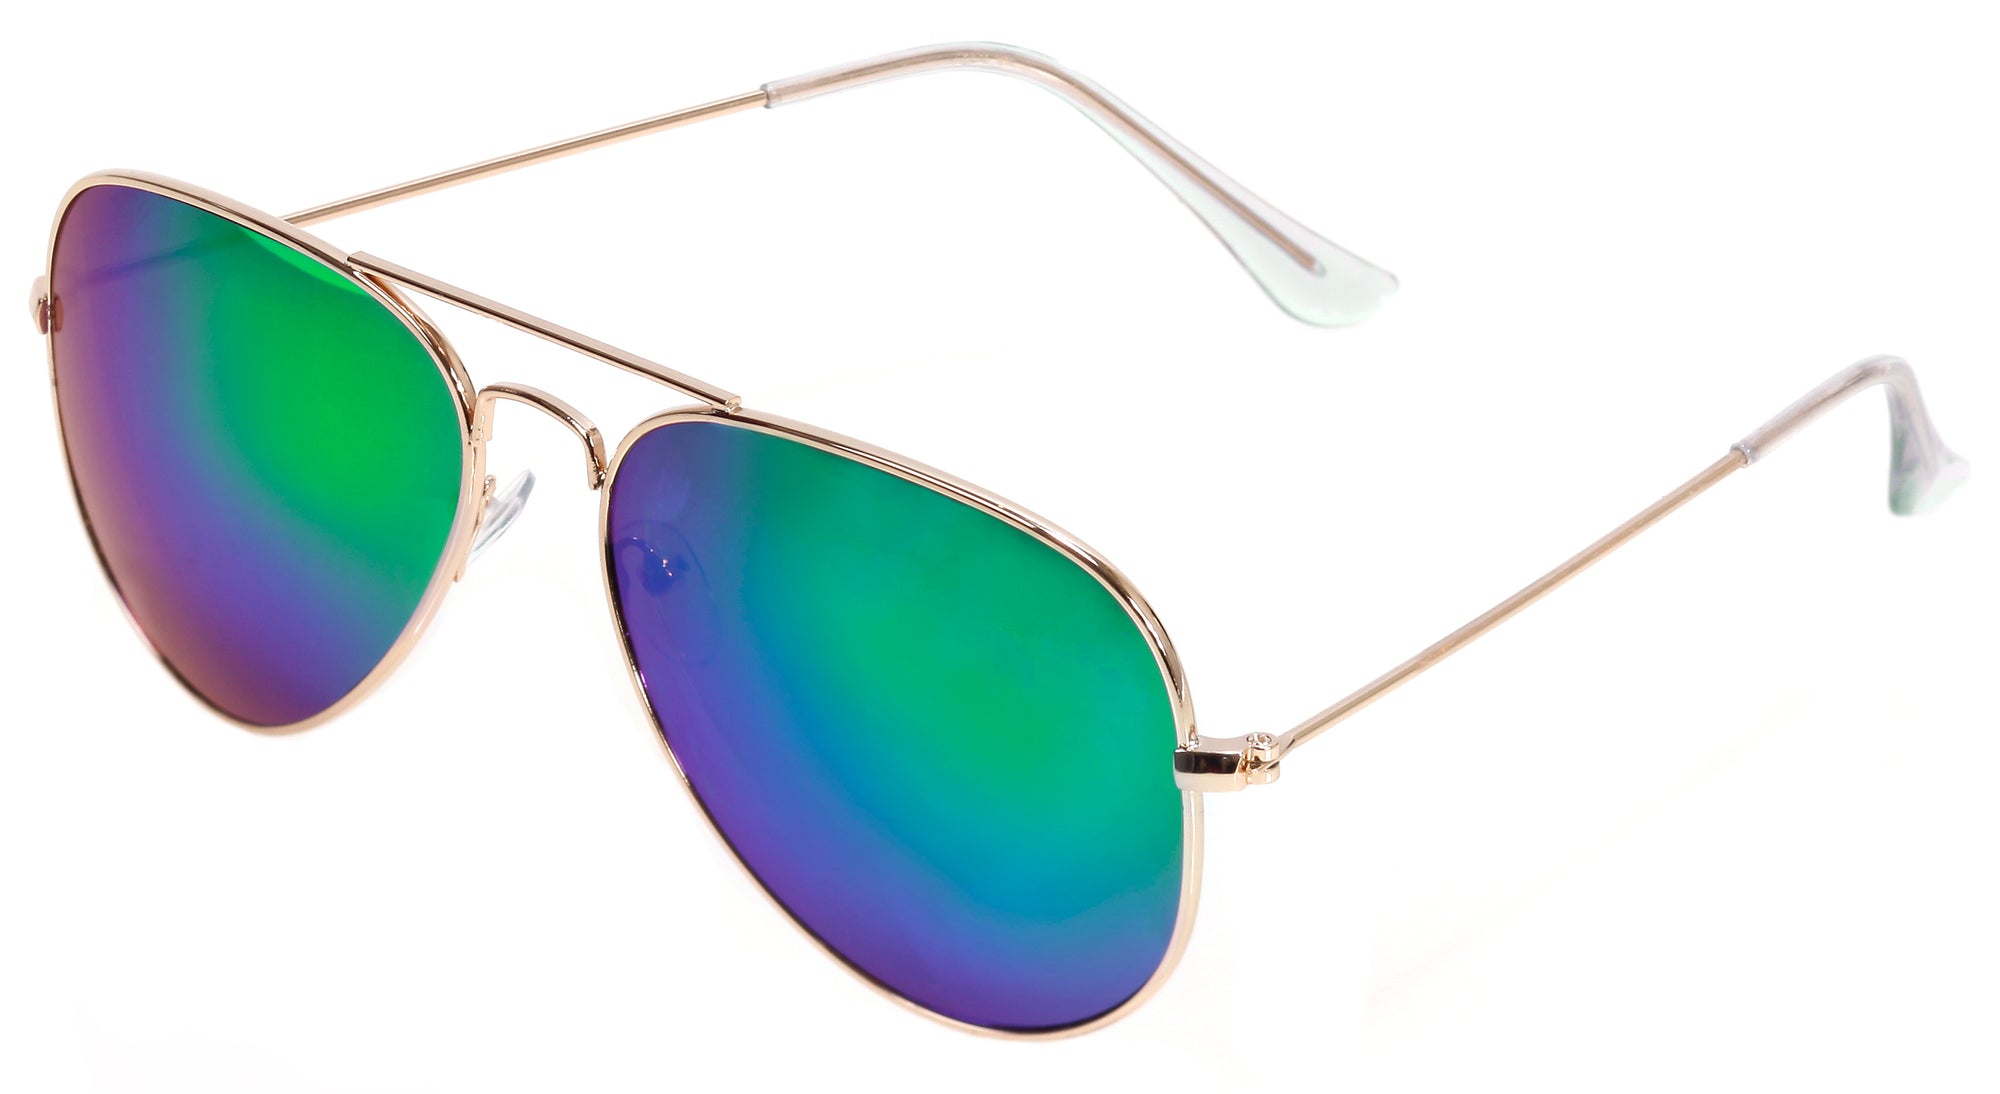 Sunglasses with blue lenses, aviator style